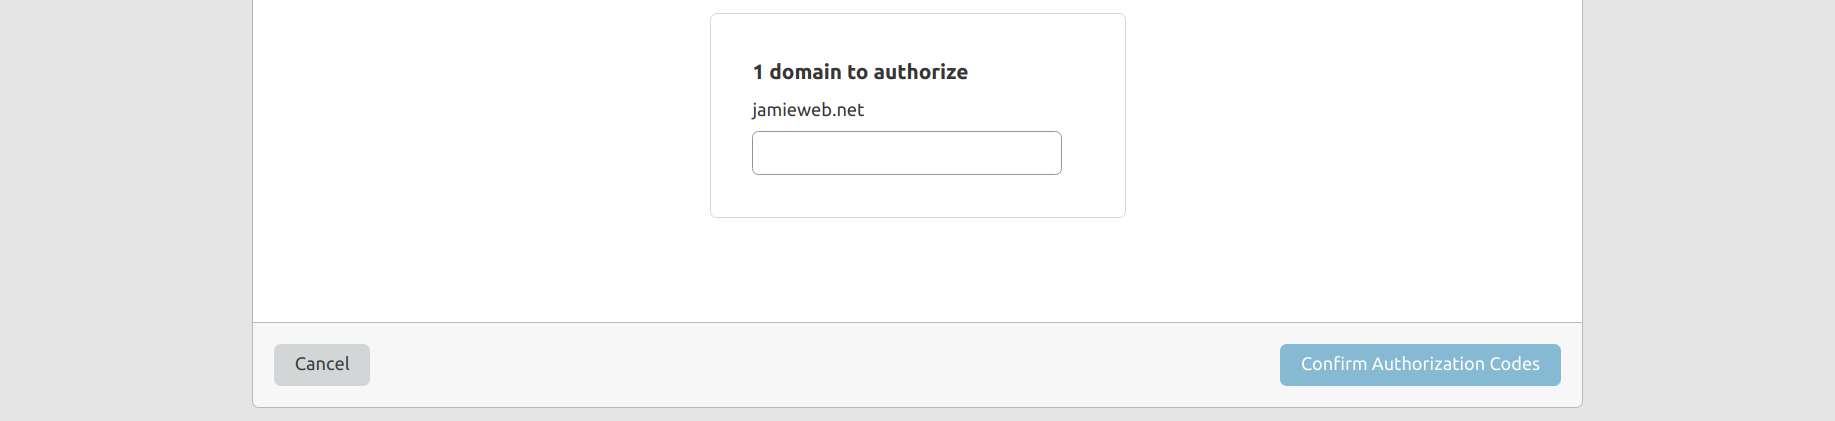 A screenshot of the prompt to enter the domain name transfer authorization code.